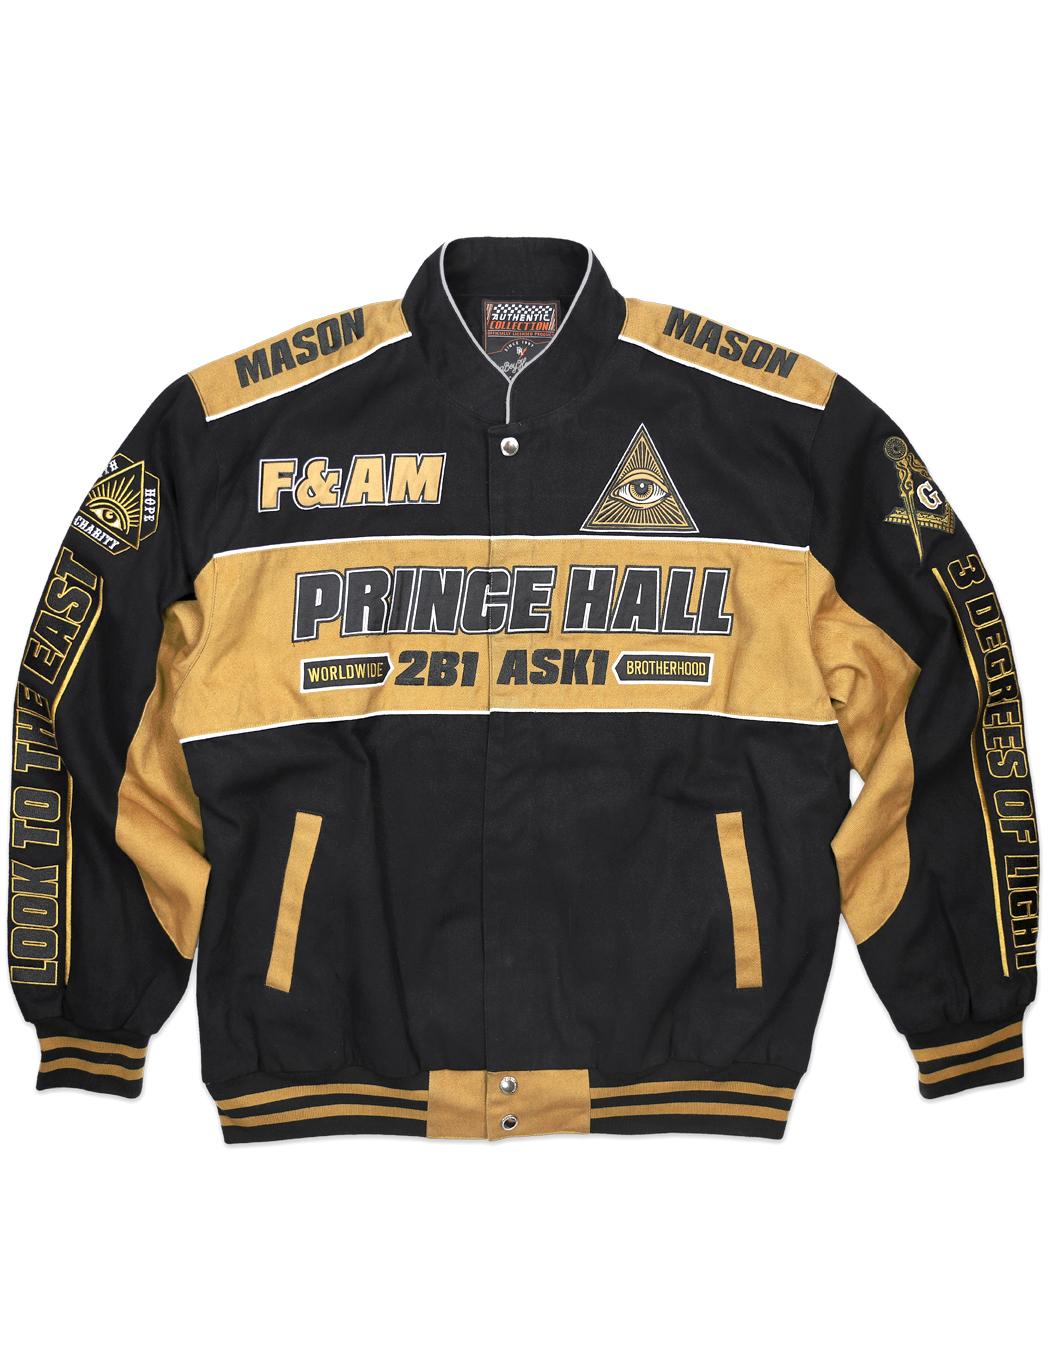 Freemason apparel Racing Jacket prince hall | African American Products and  Gifts Store - African Imports USA